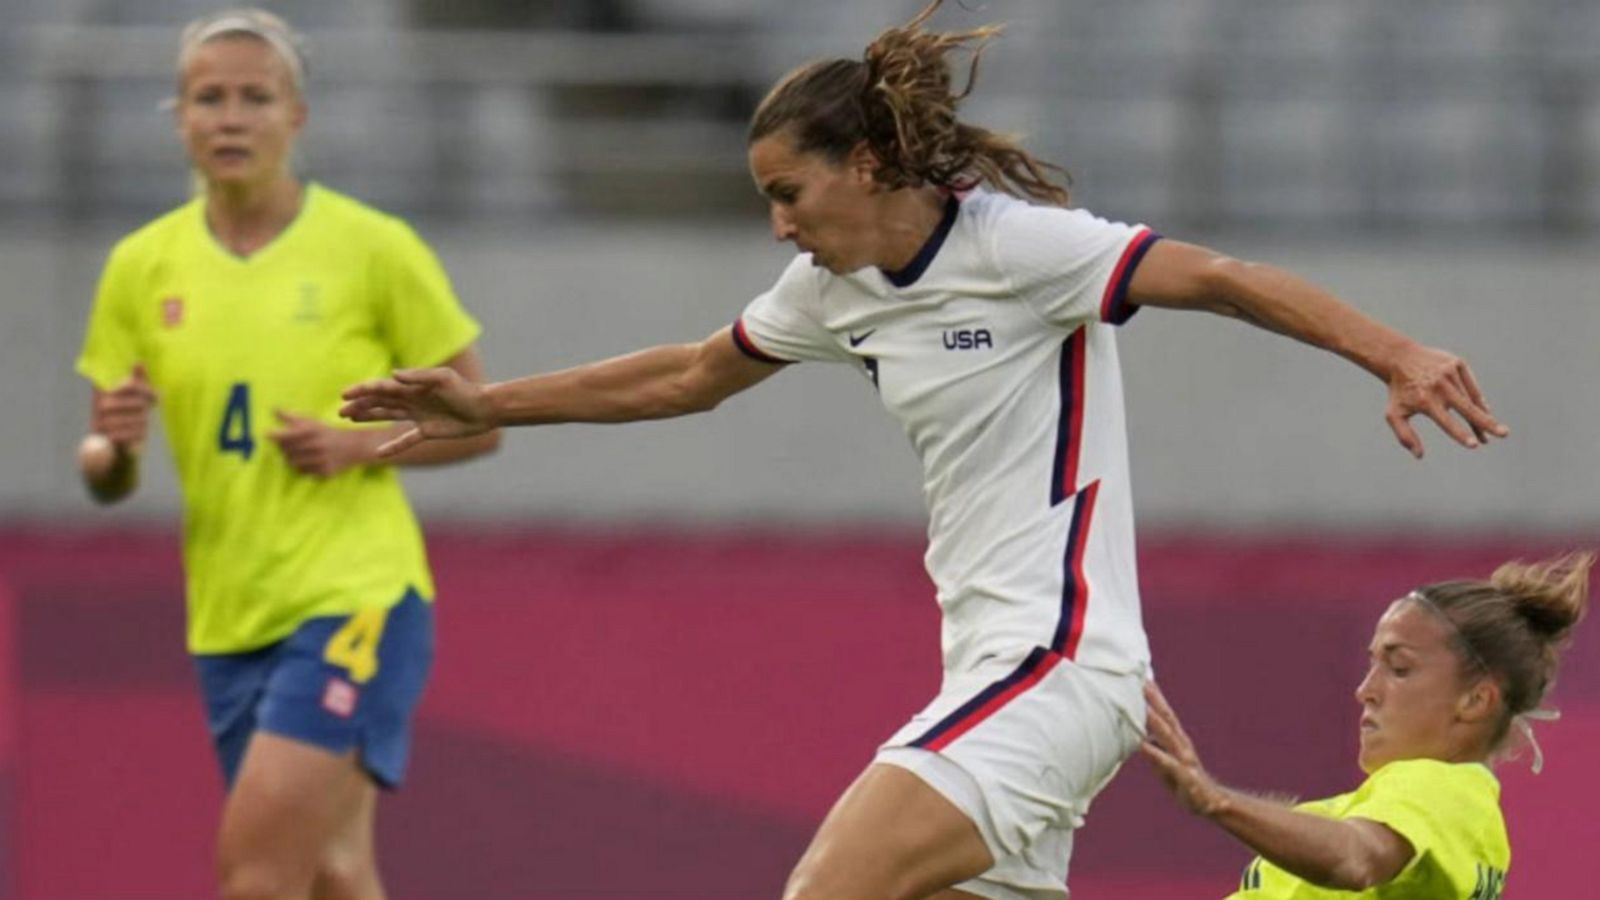 VIDEO: Team USA prepares for 1st knockout match against Sweden